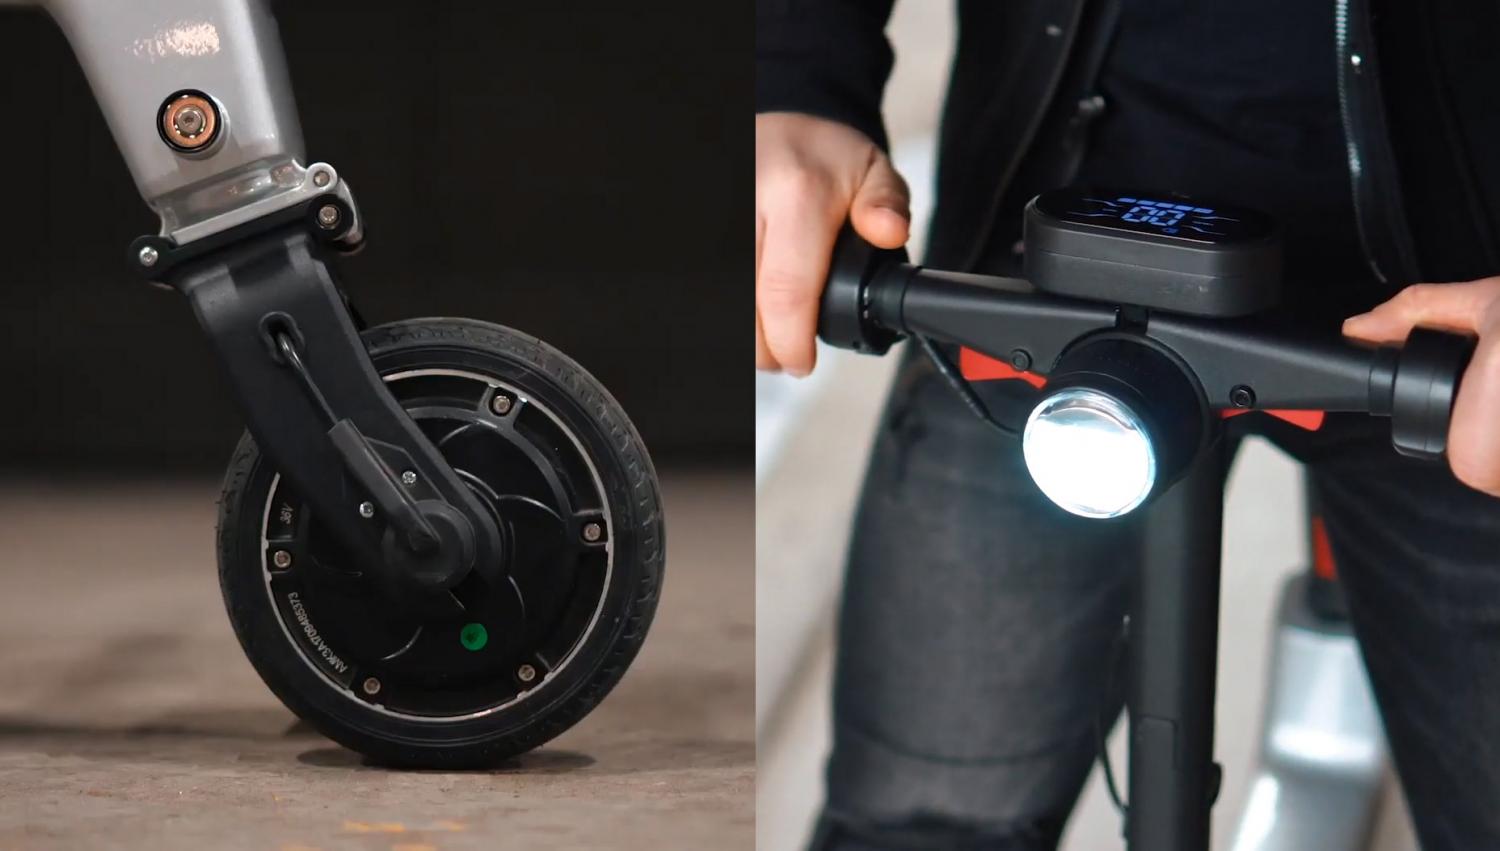 HIMO Folding E-Bike Collapses Down To Fit In Your Backpack - Tiny folding electric scooter